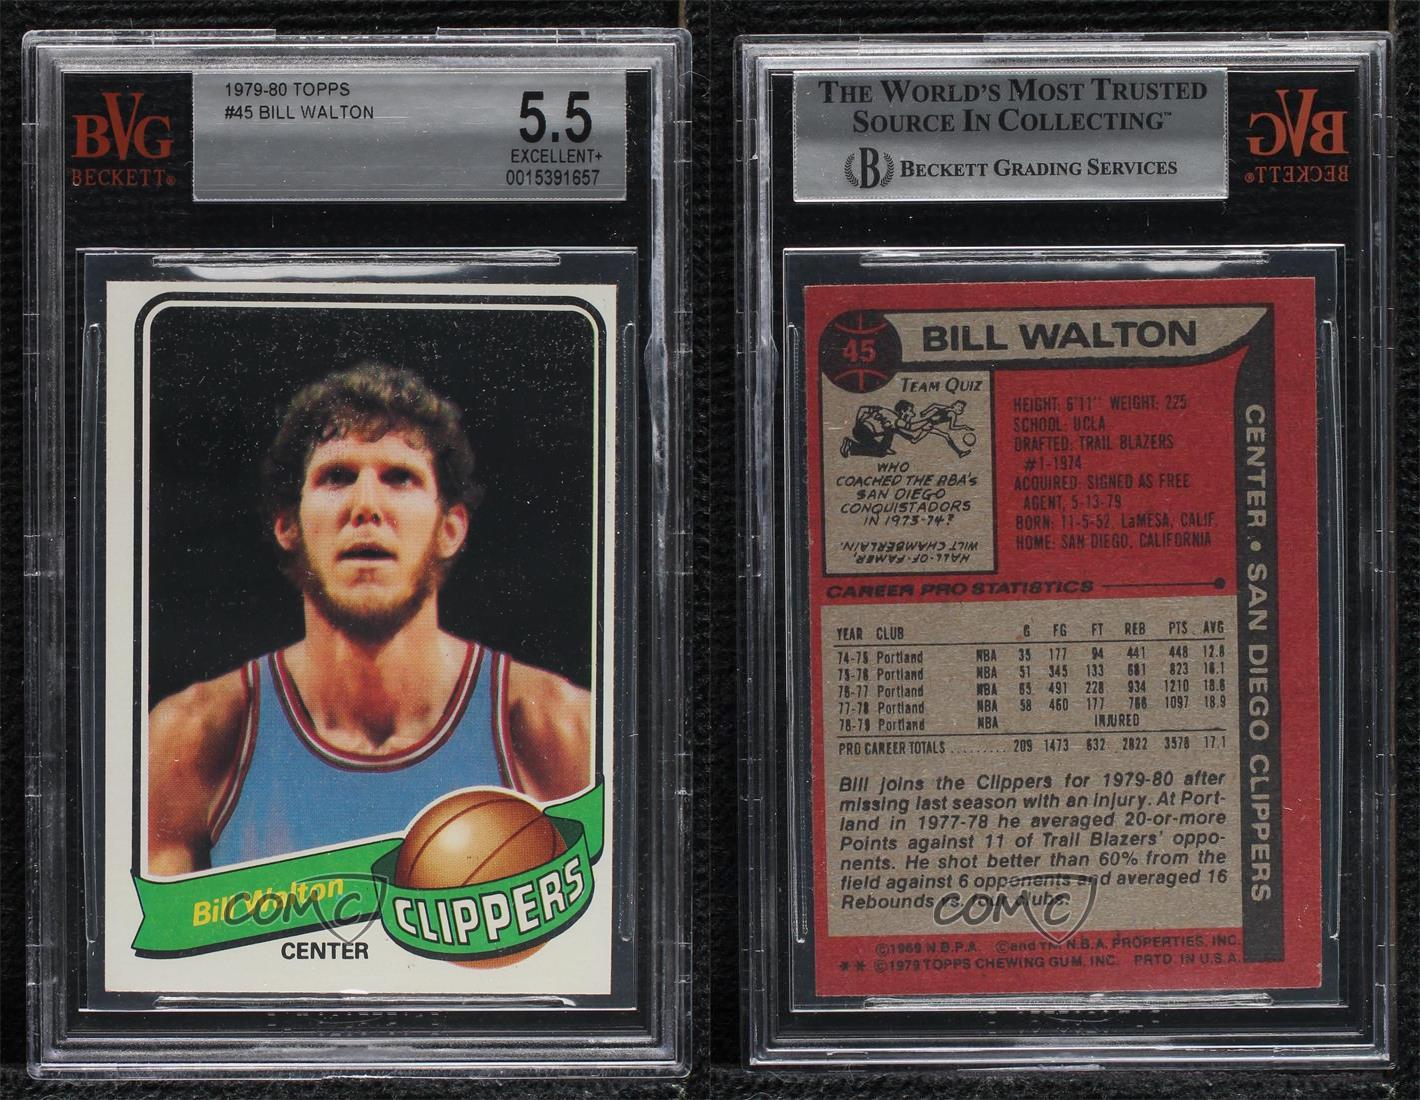 Bill Walton returns to NBA, Clippers after missing season - Sports